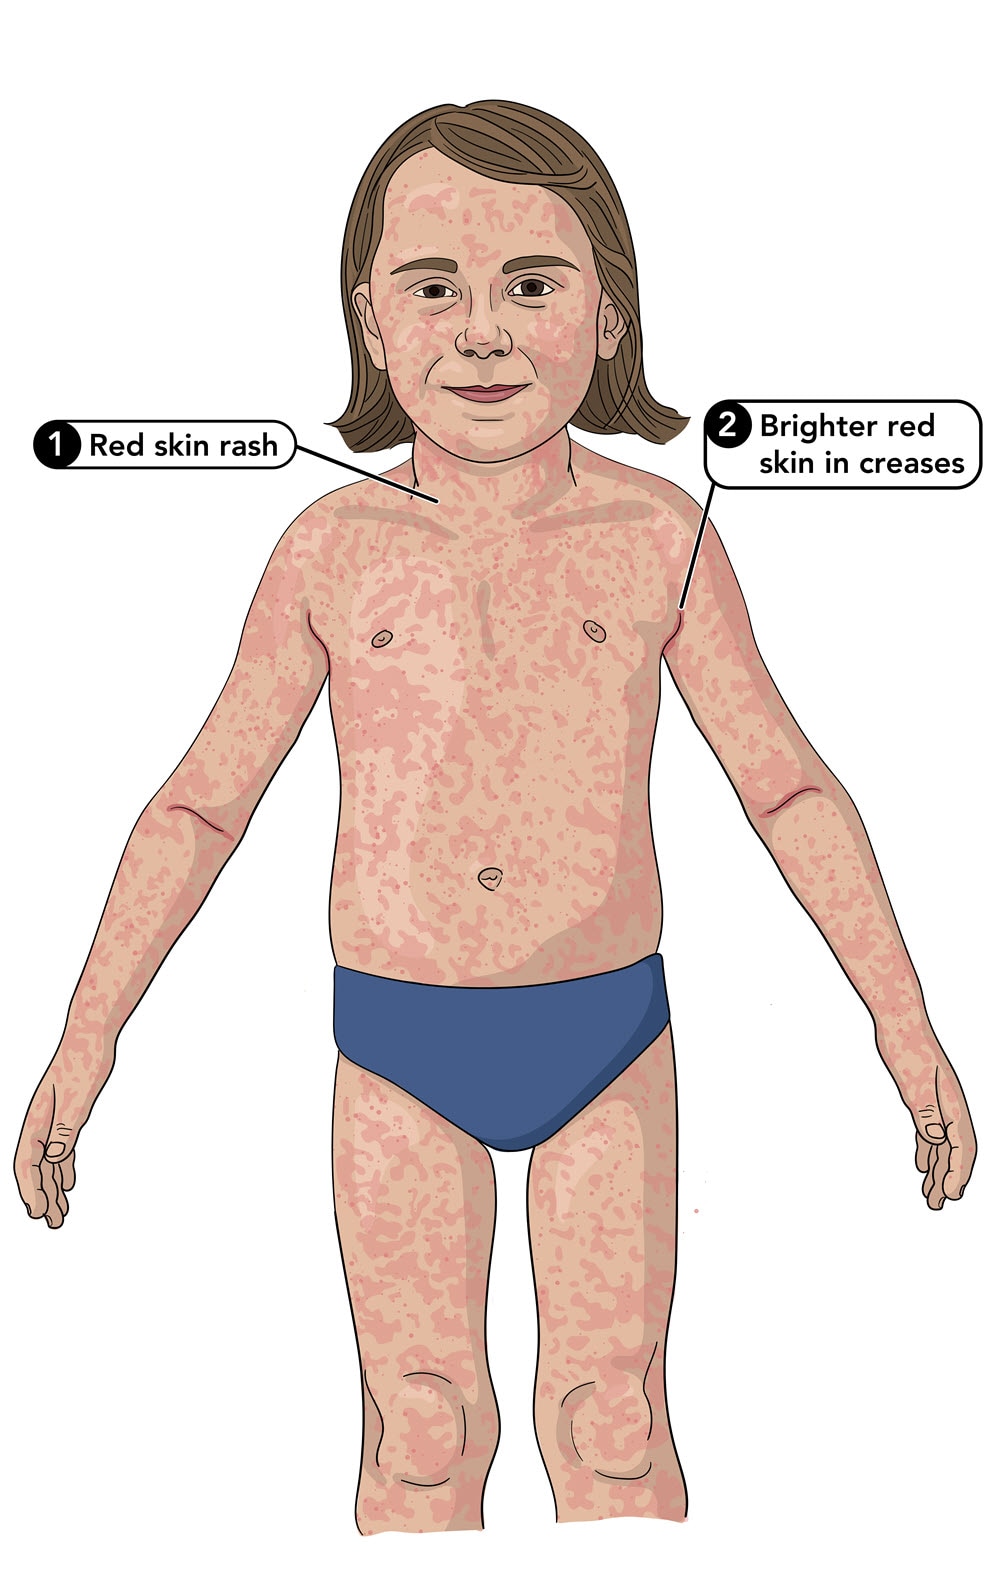 Scarlet Fever: All You Need to Know